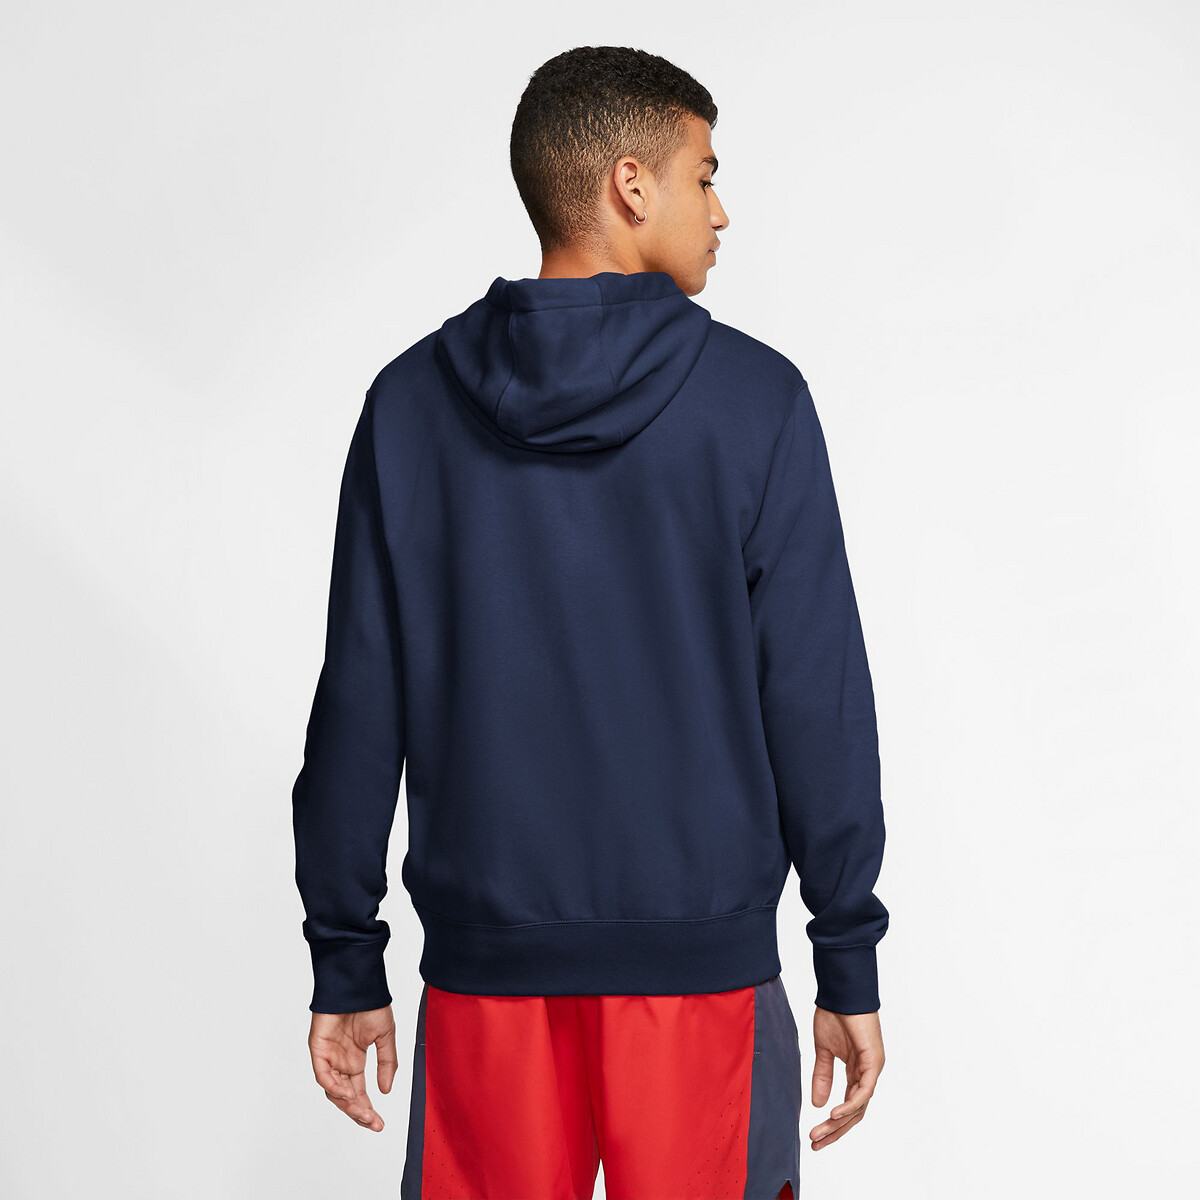 Sweat capuche Nike Sportswear French Terry World Tour pour Homme